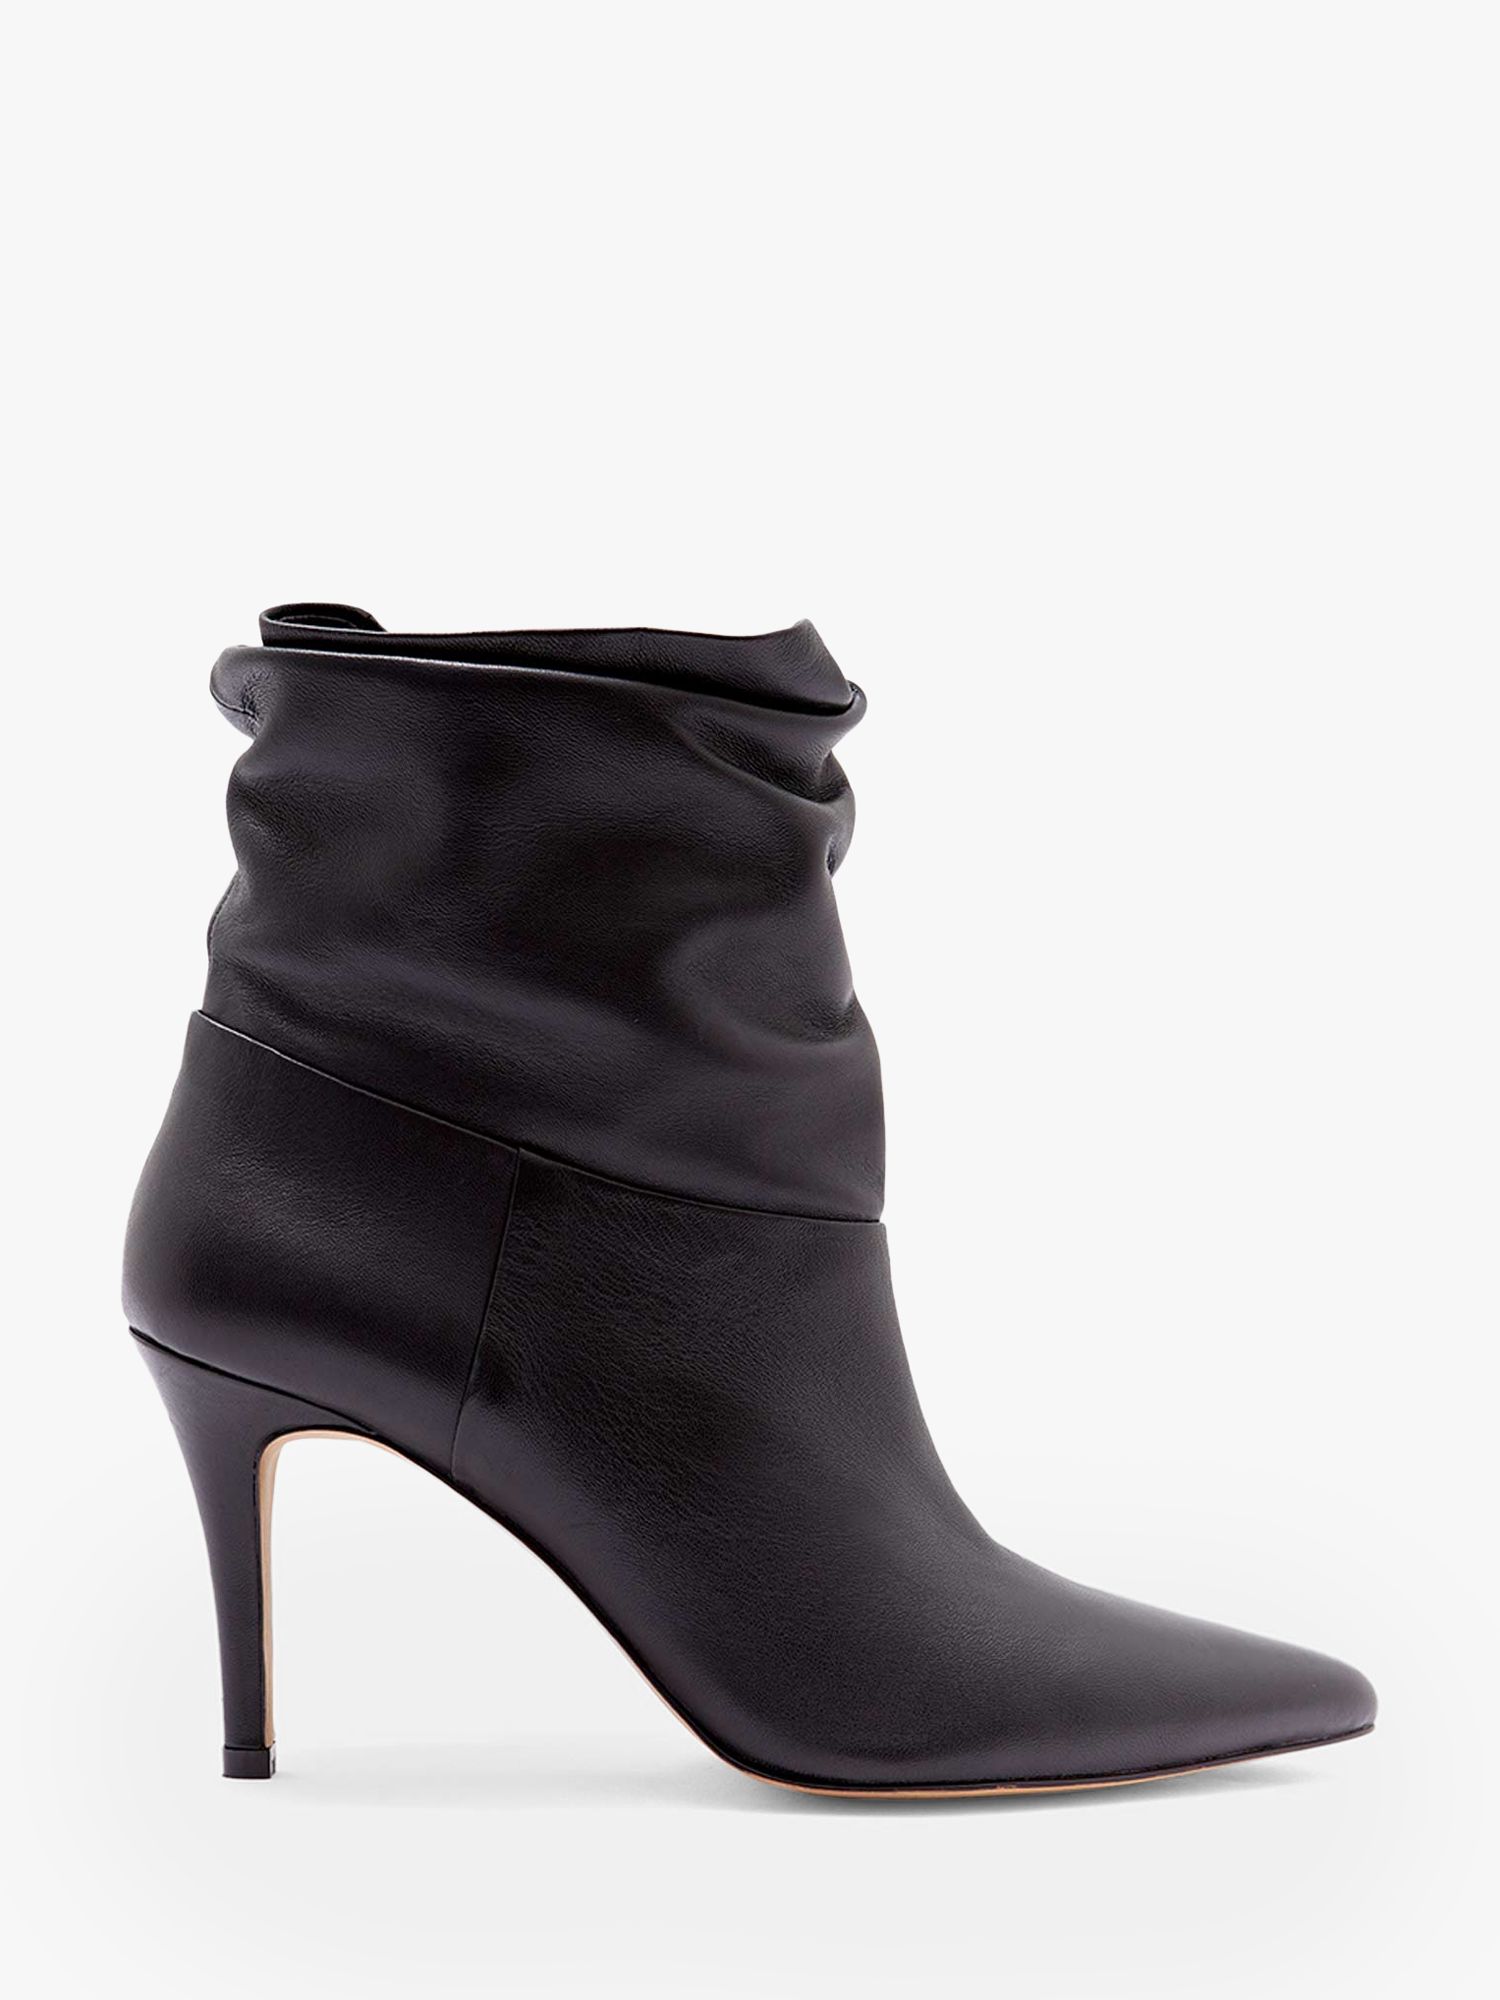 Mint Velvet Anya Leather Slouchy Ankle Boots, Black at John Lewis ...